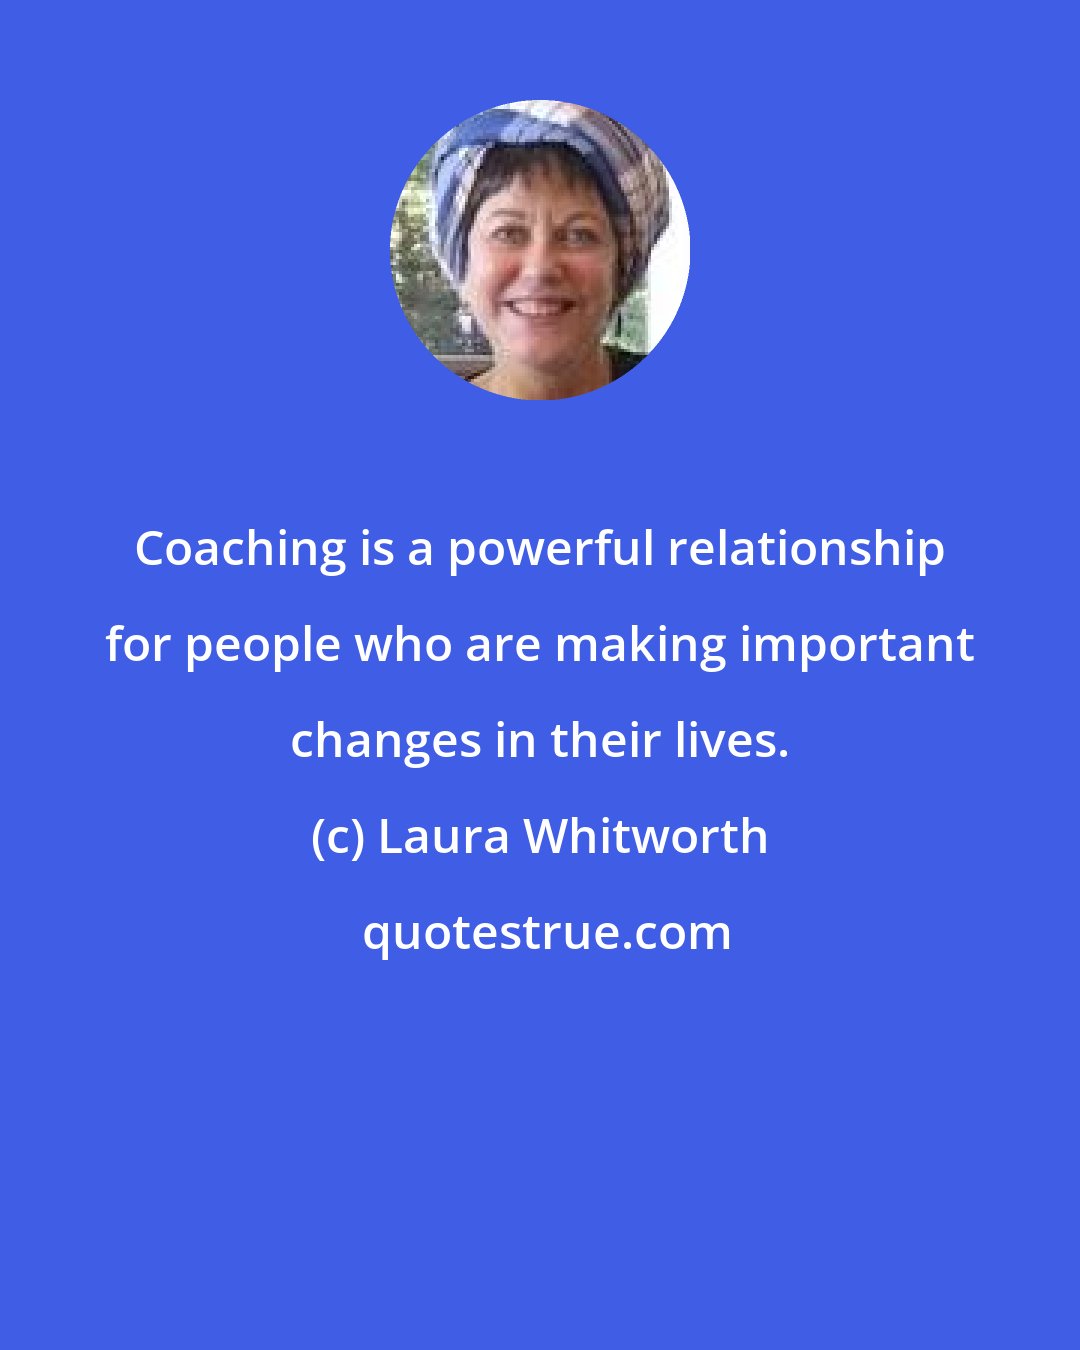 Laura Whitworth: Coaching is a powerful relationship for people who are making important changes in their lives.